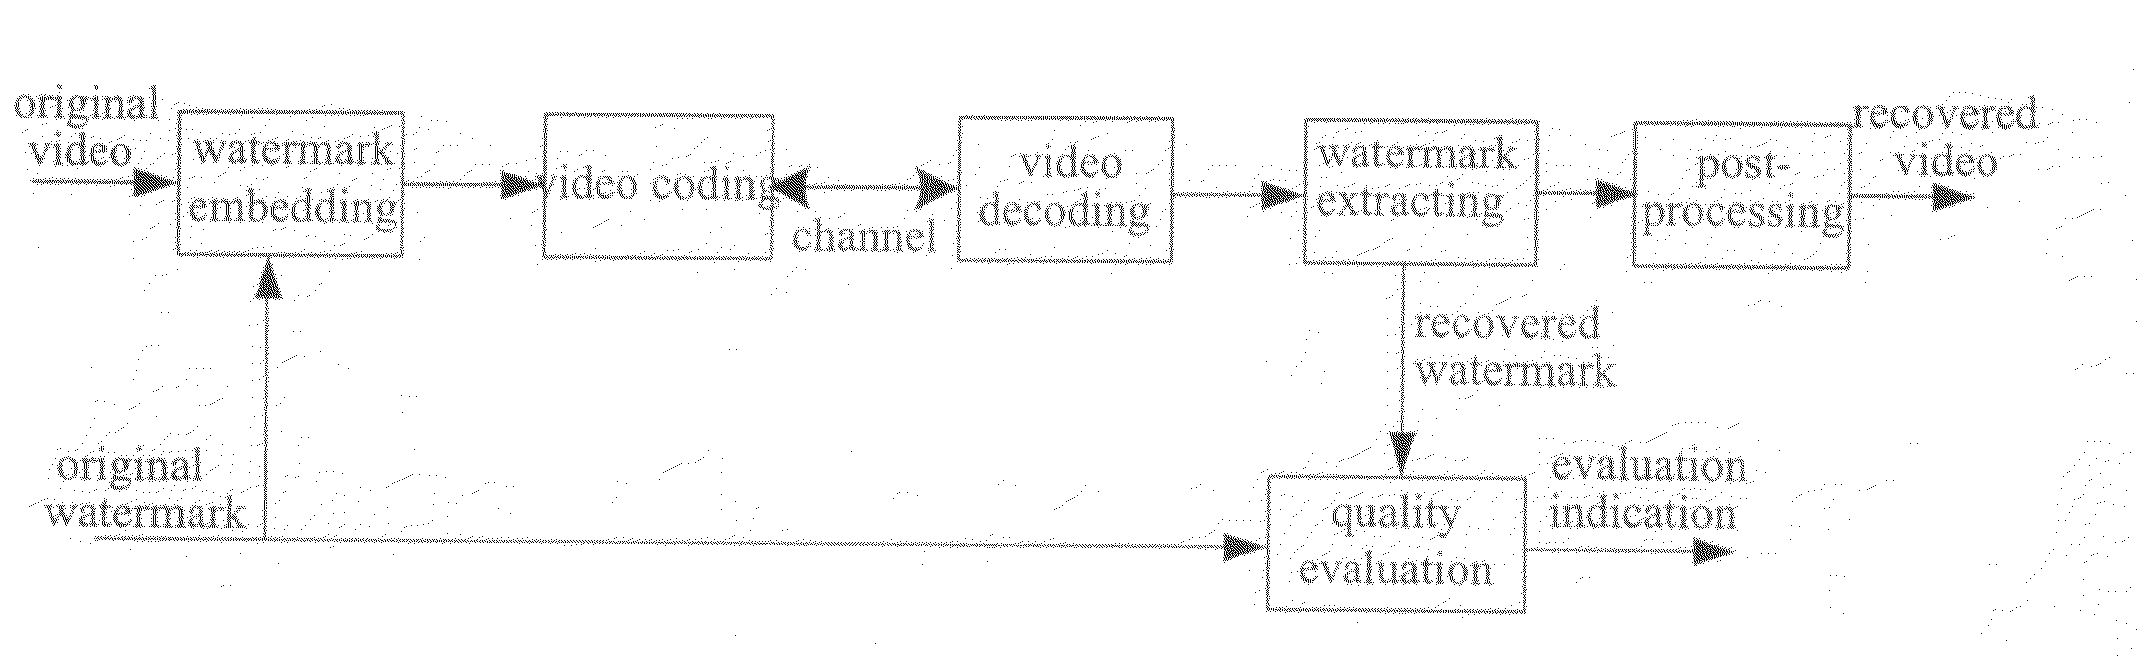 Method for Measuring Multimedia Video Communication Quality